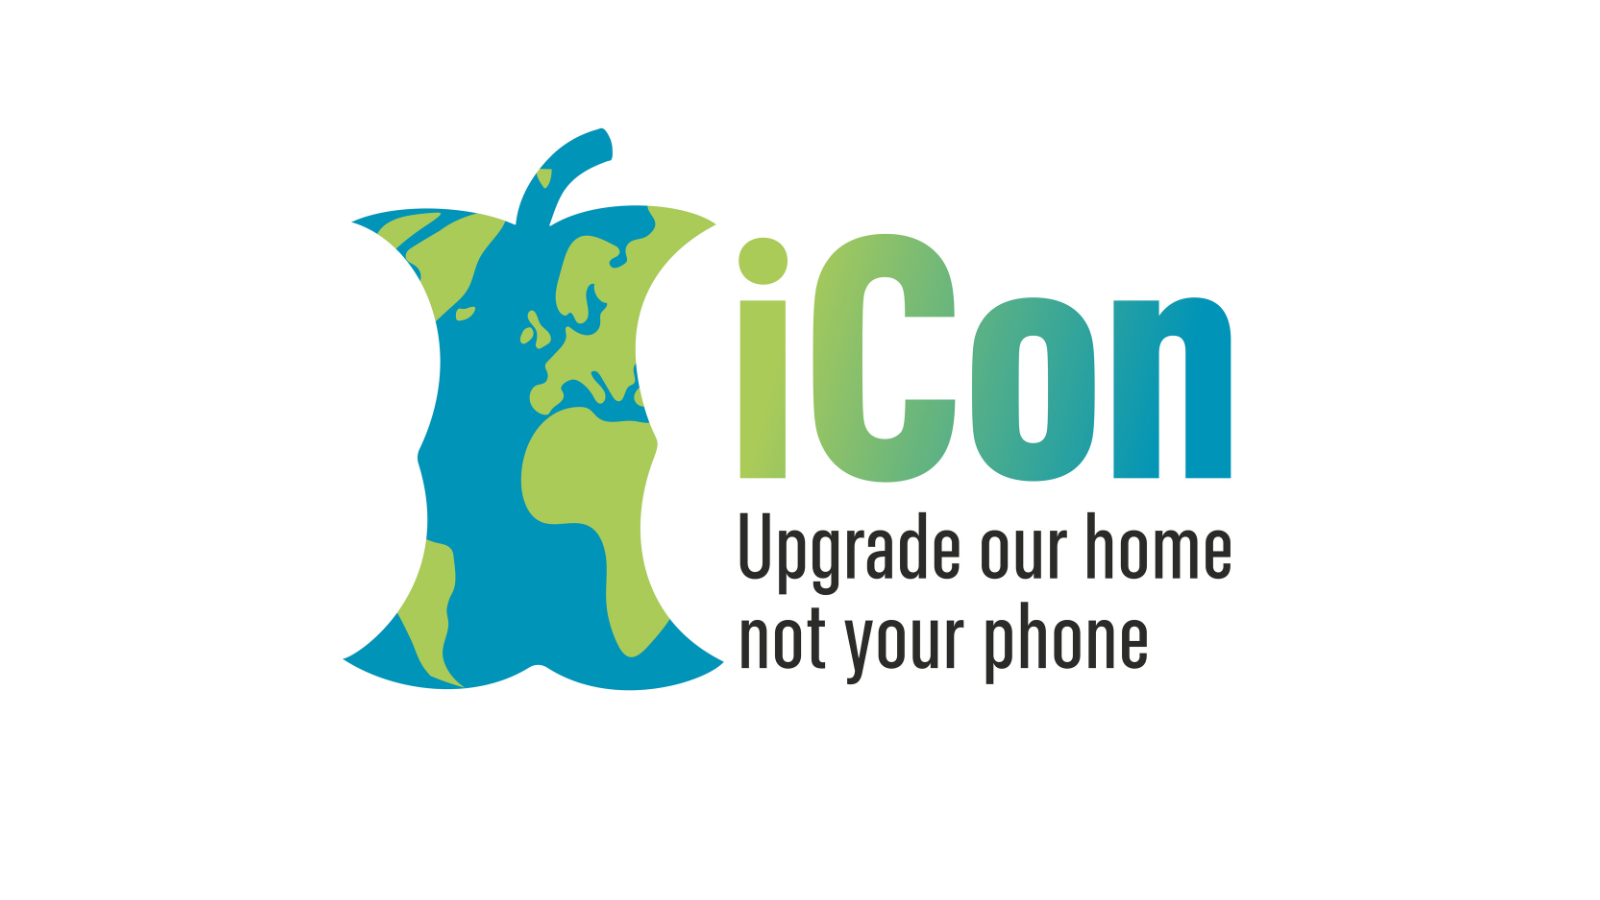 iCon: Apple, consumption, and the future of the planet